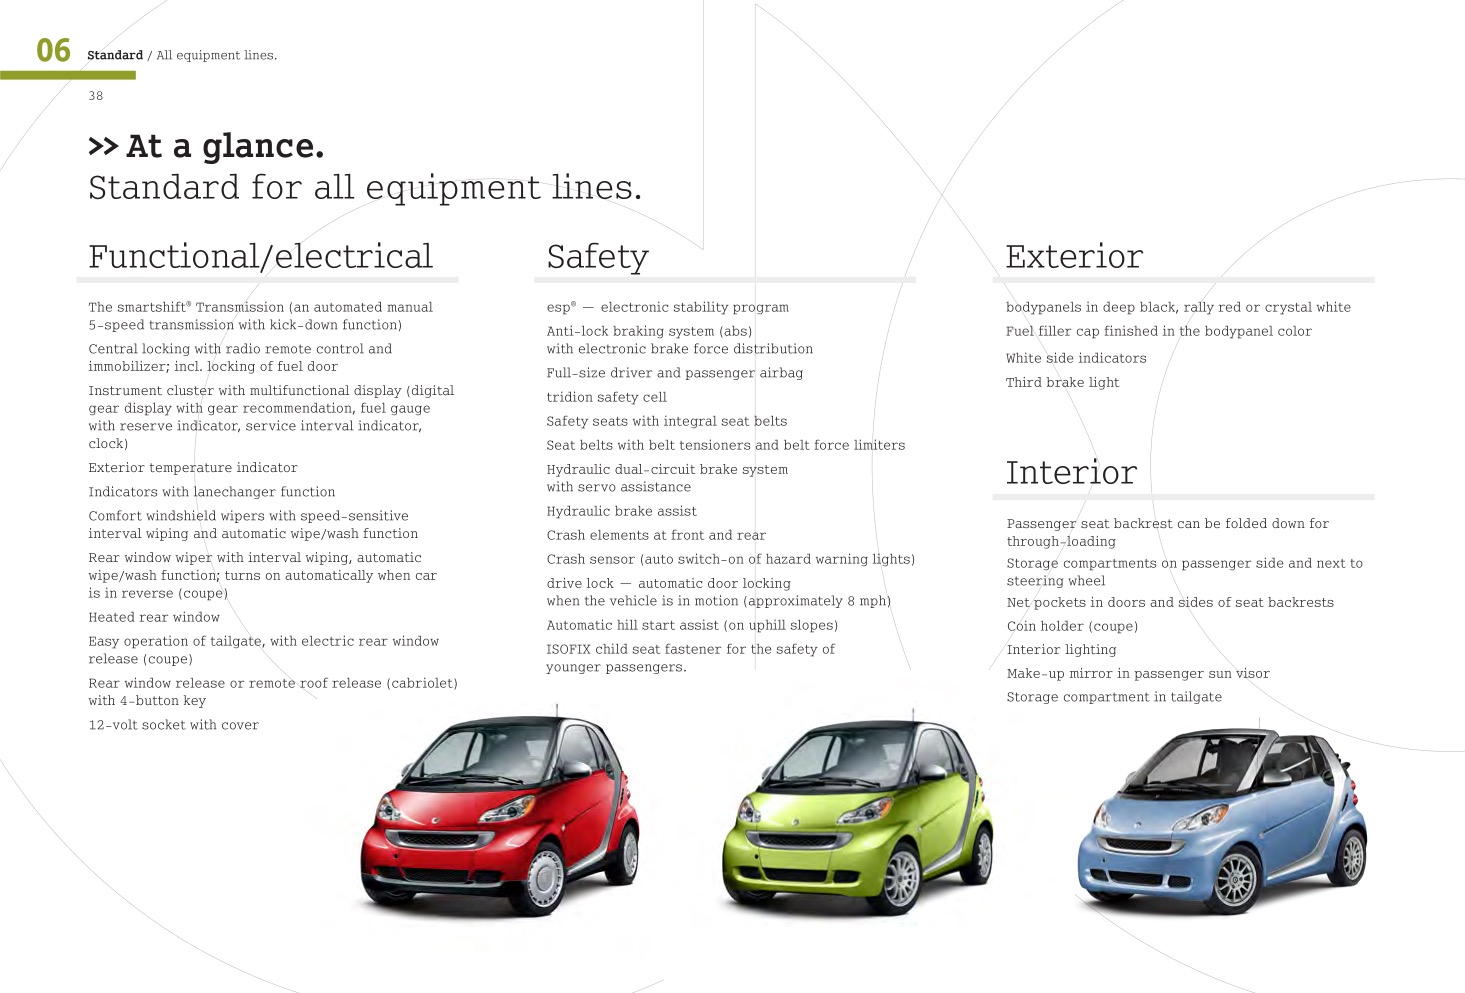 2011 Smart Fortwo Brochure Page 47